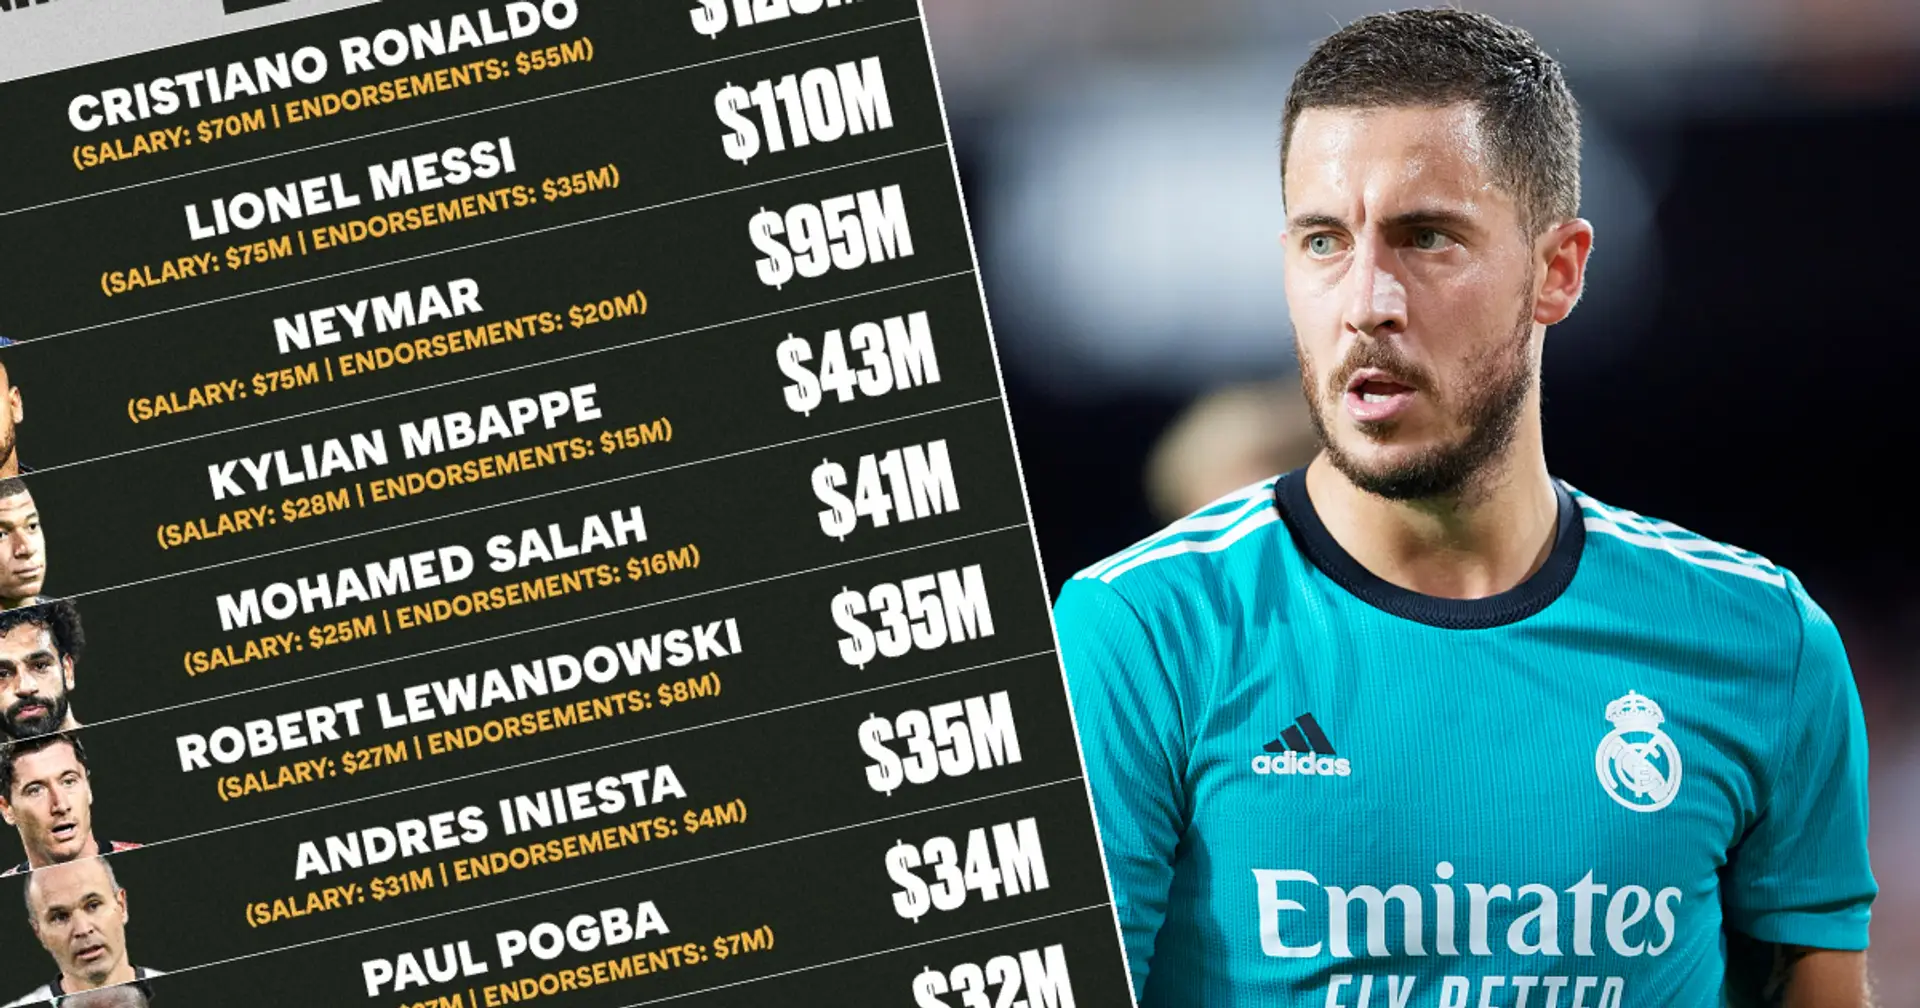 Highest paid footballers in the world in 2021 revealed, 2 Real Madrid players in top 10